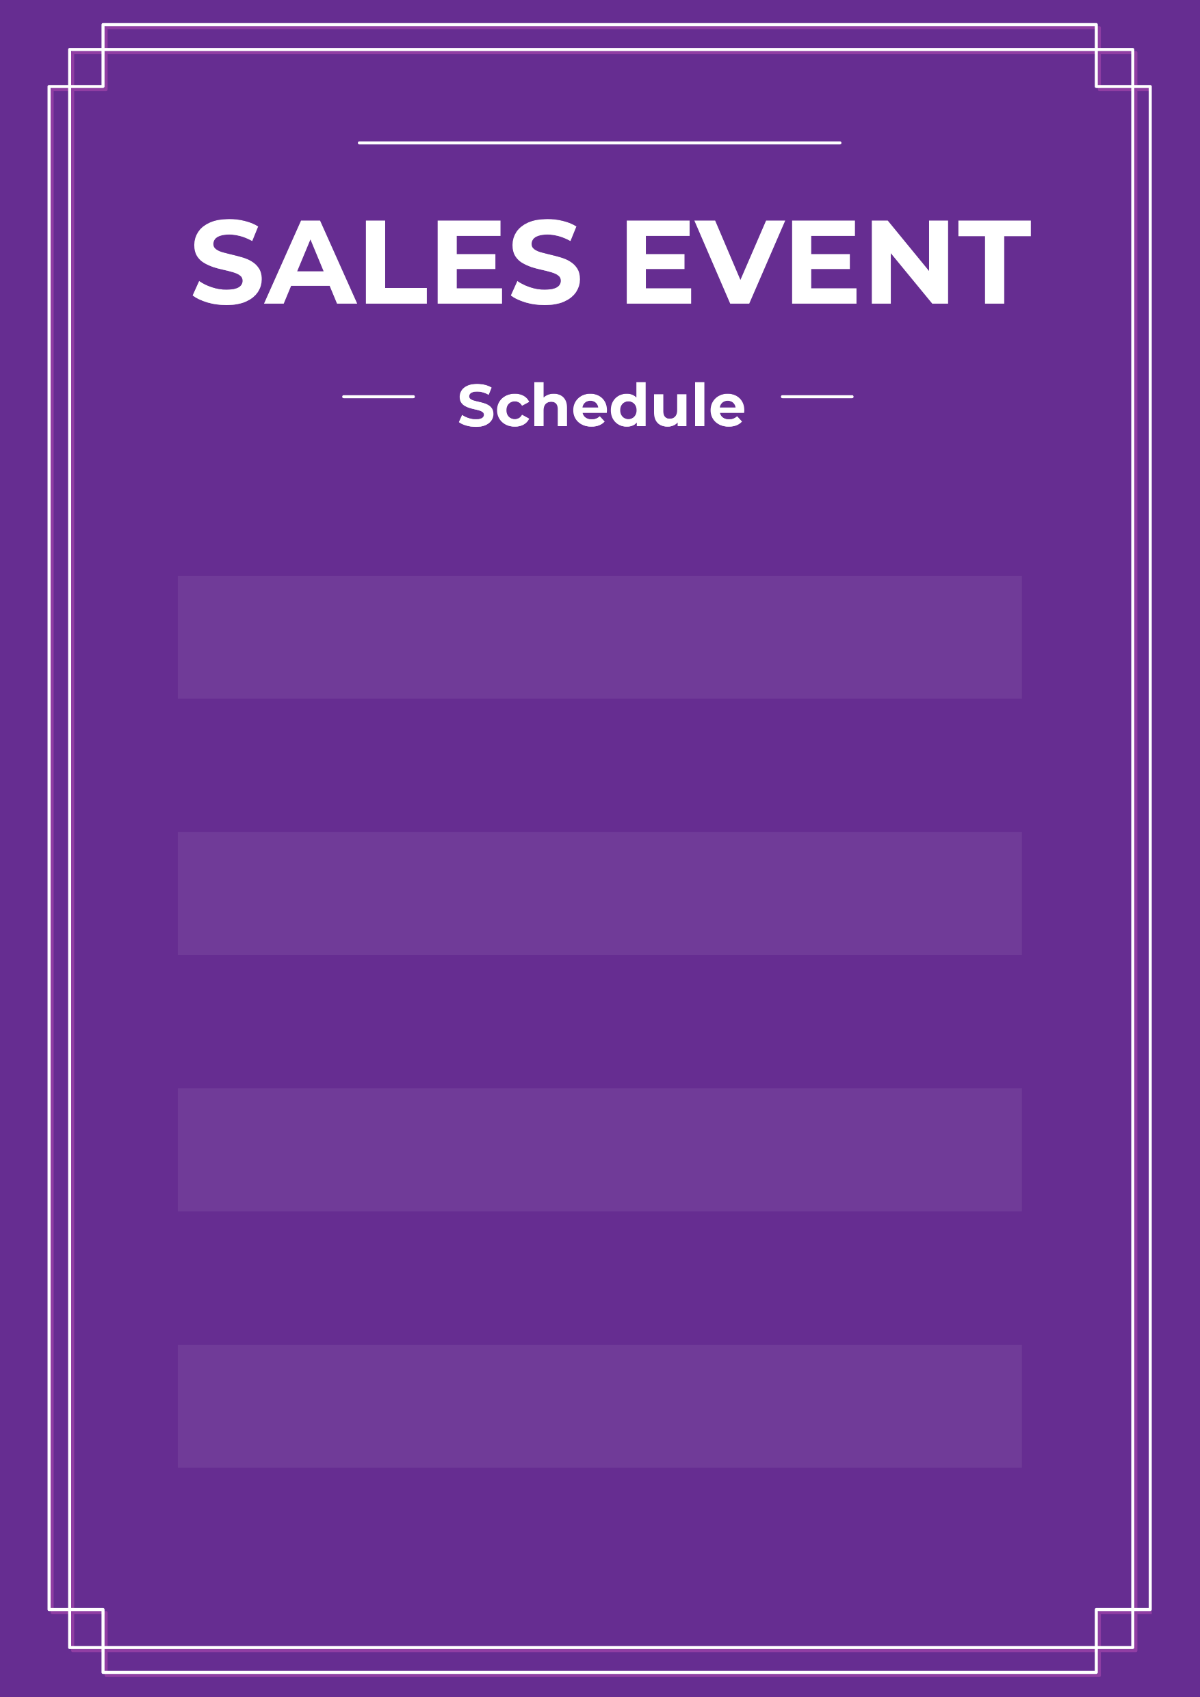 Sales Event Schedule Signage Template